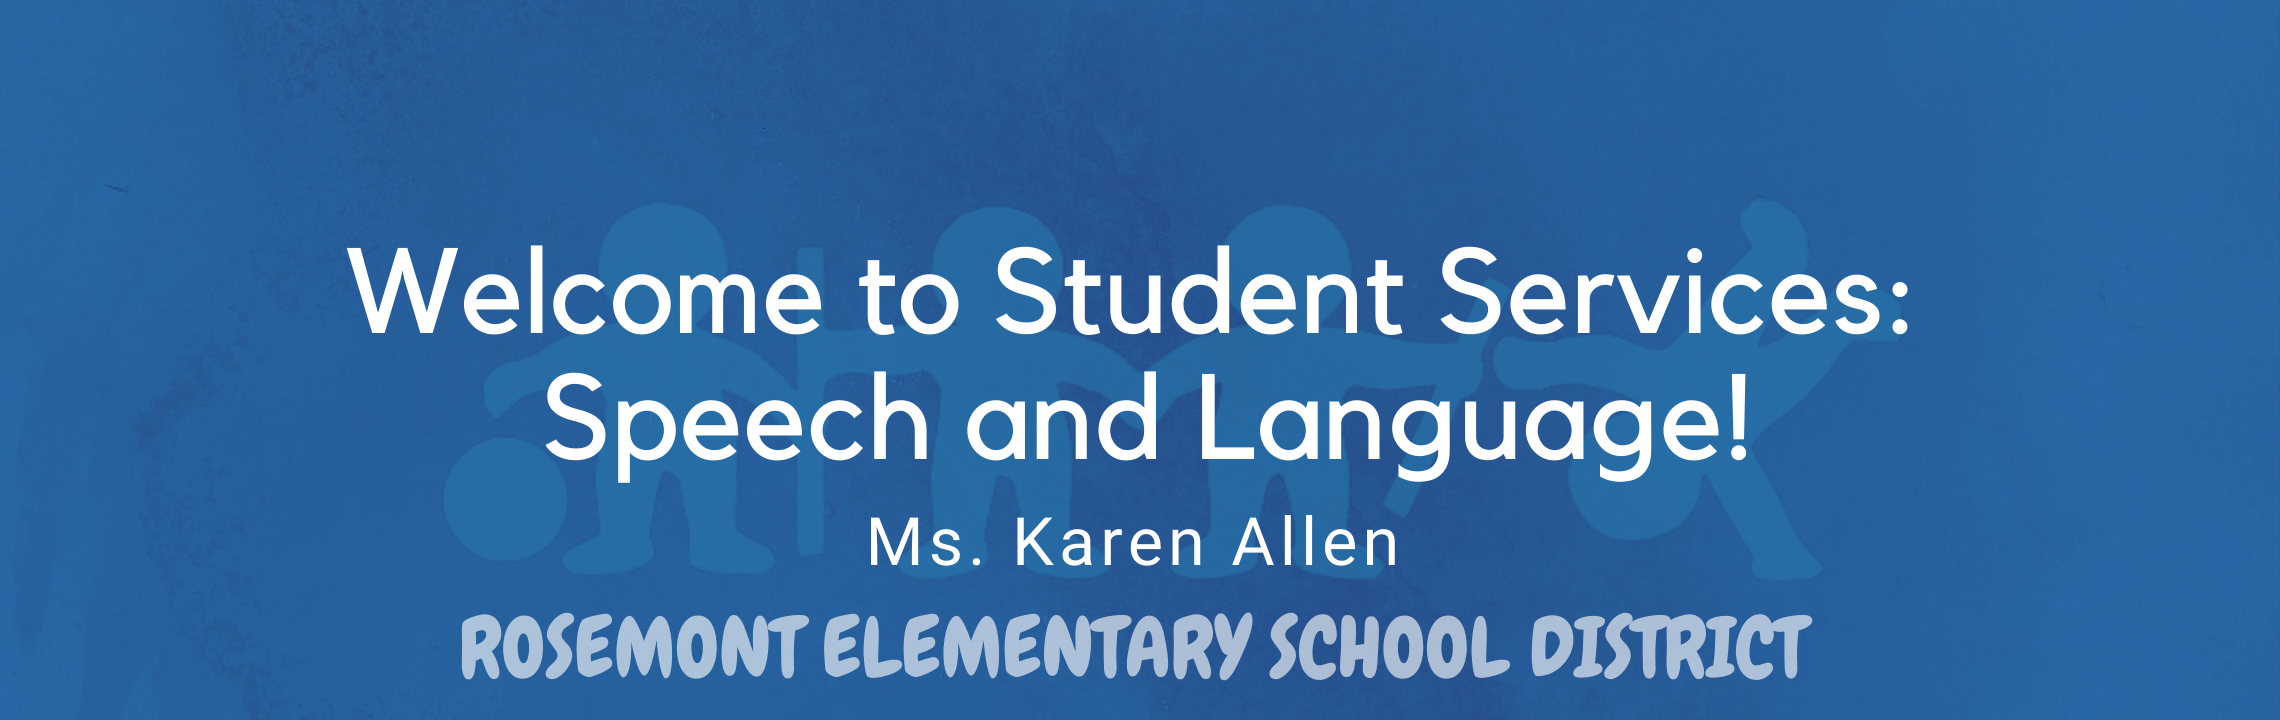 Welcome to Student Services: Speech and Language! Ms. Karen Allen